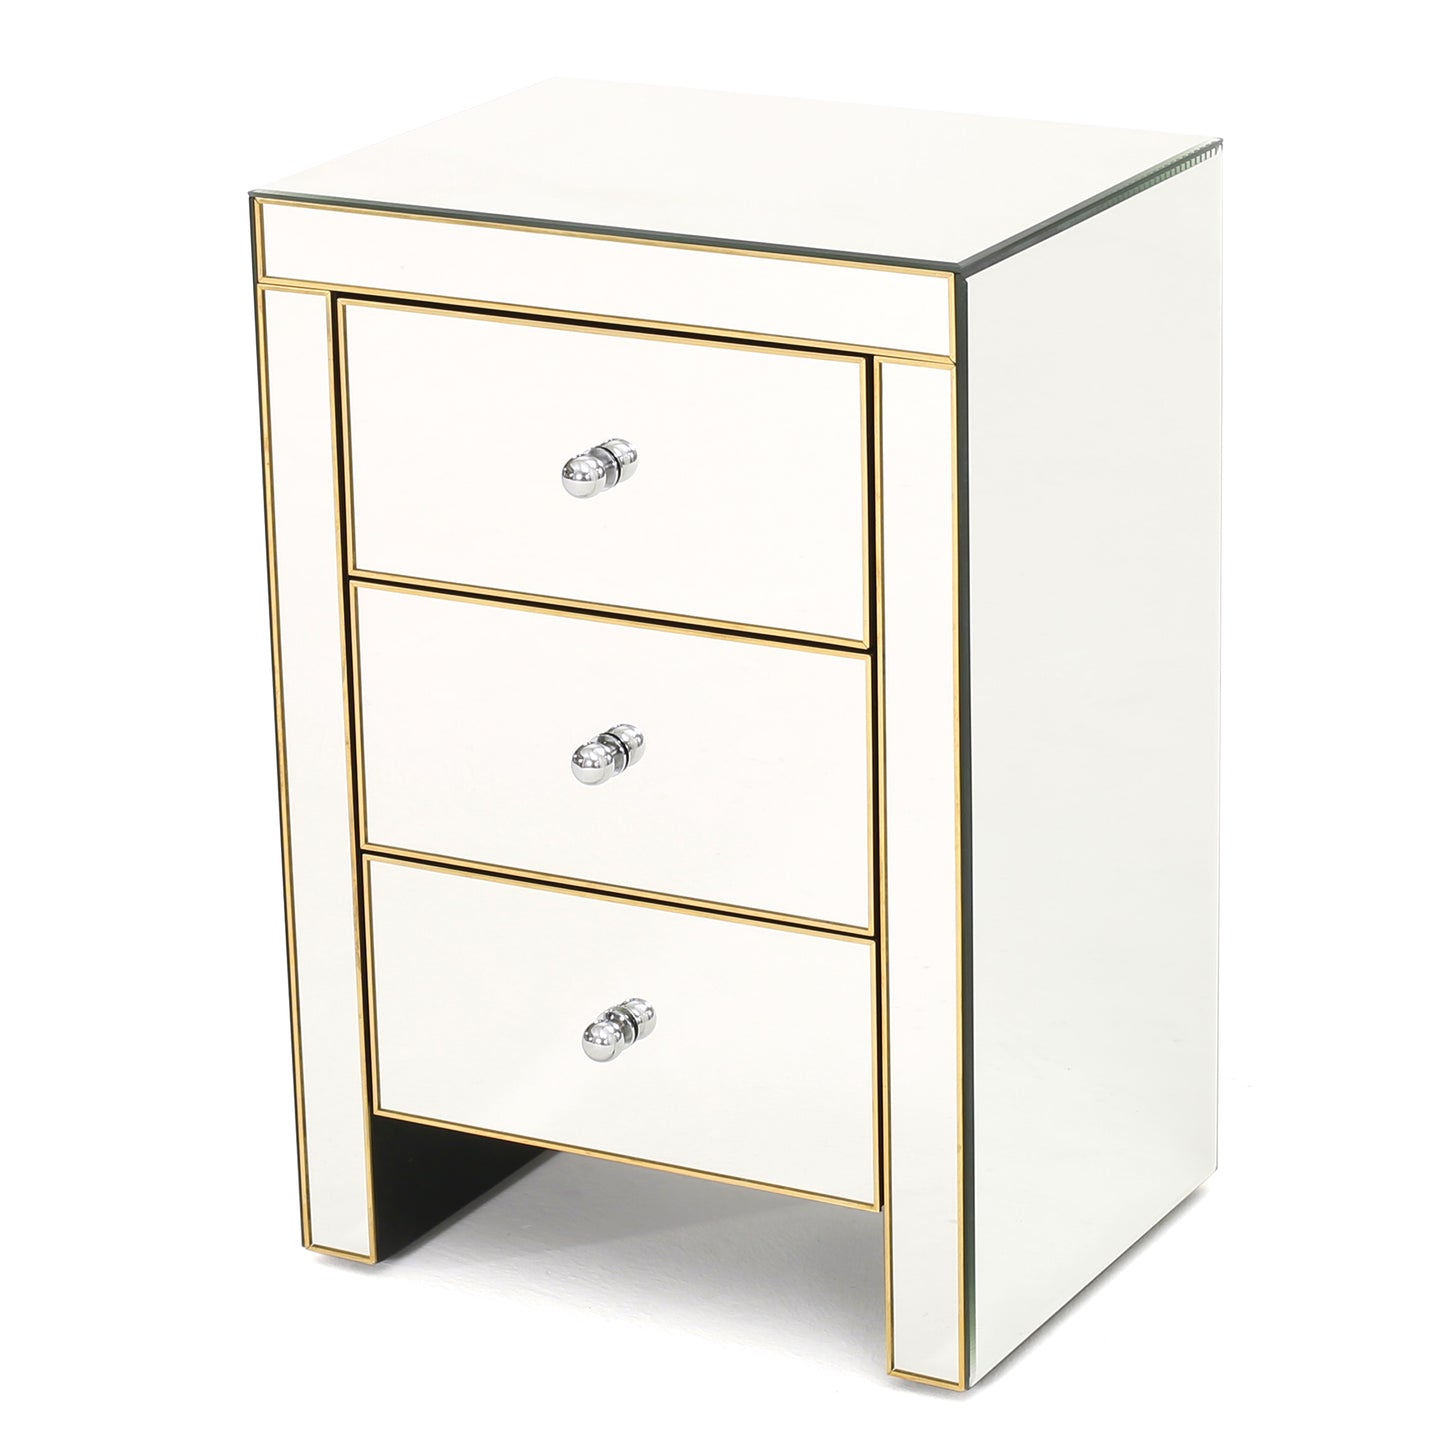 Langley Mirrored 3 Drawer Side Table